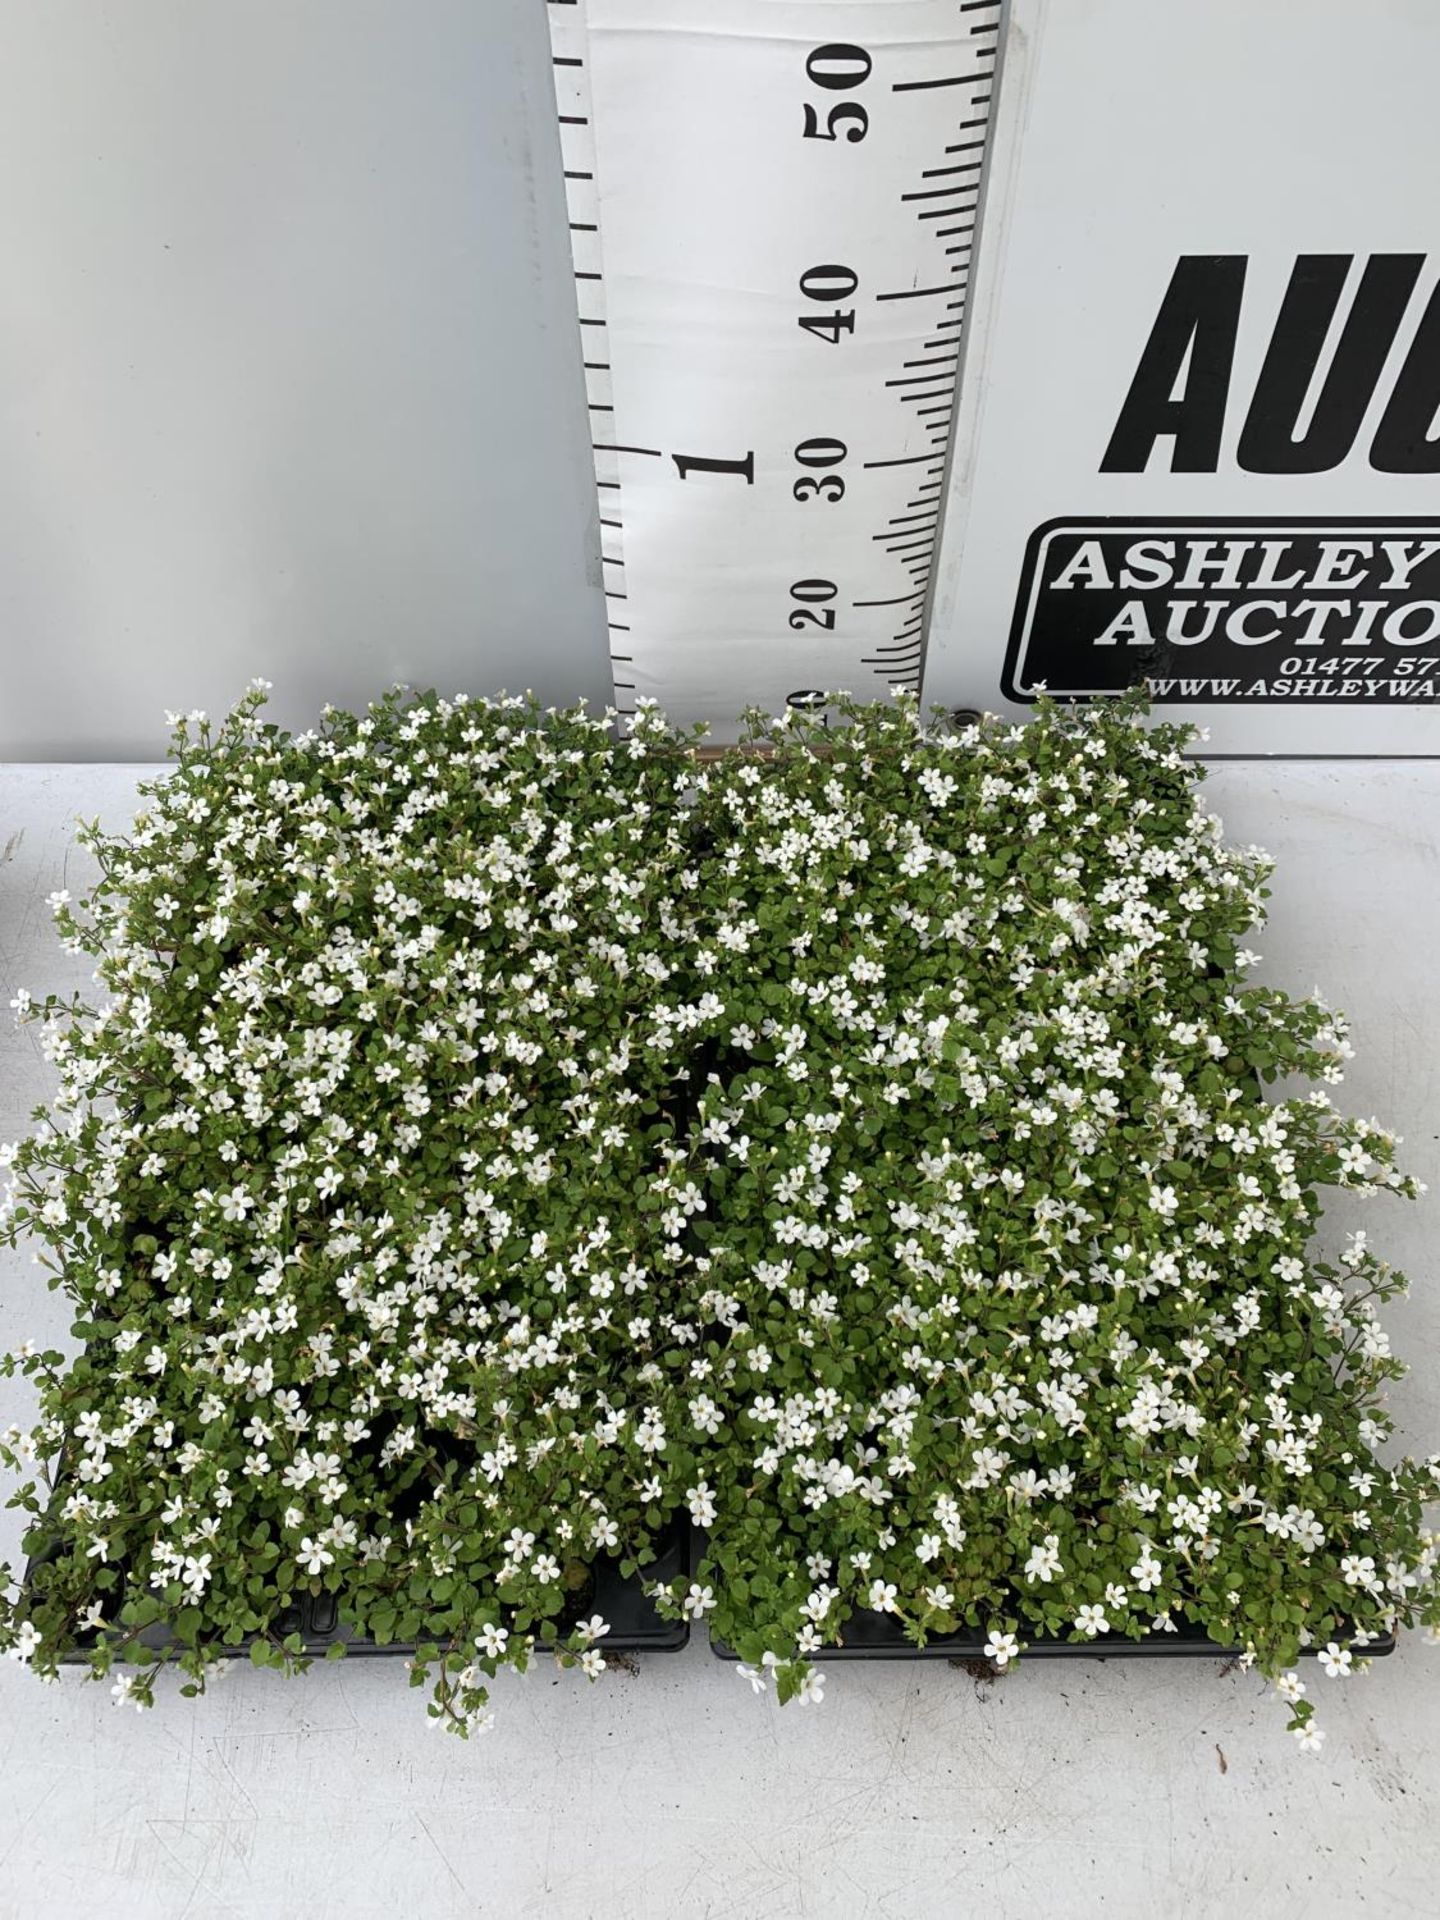 ONE HUNDRED AND SIXTY BACOPA 'SNOWFLAKE' BEDDING PLANTS ON A TWO TRAYS PLUS VAT TO BE SOLD FOR THE